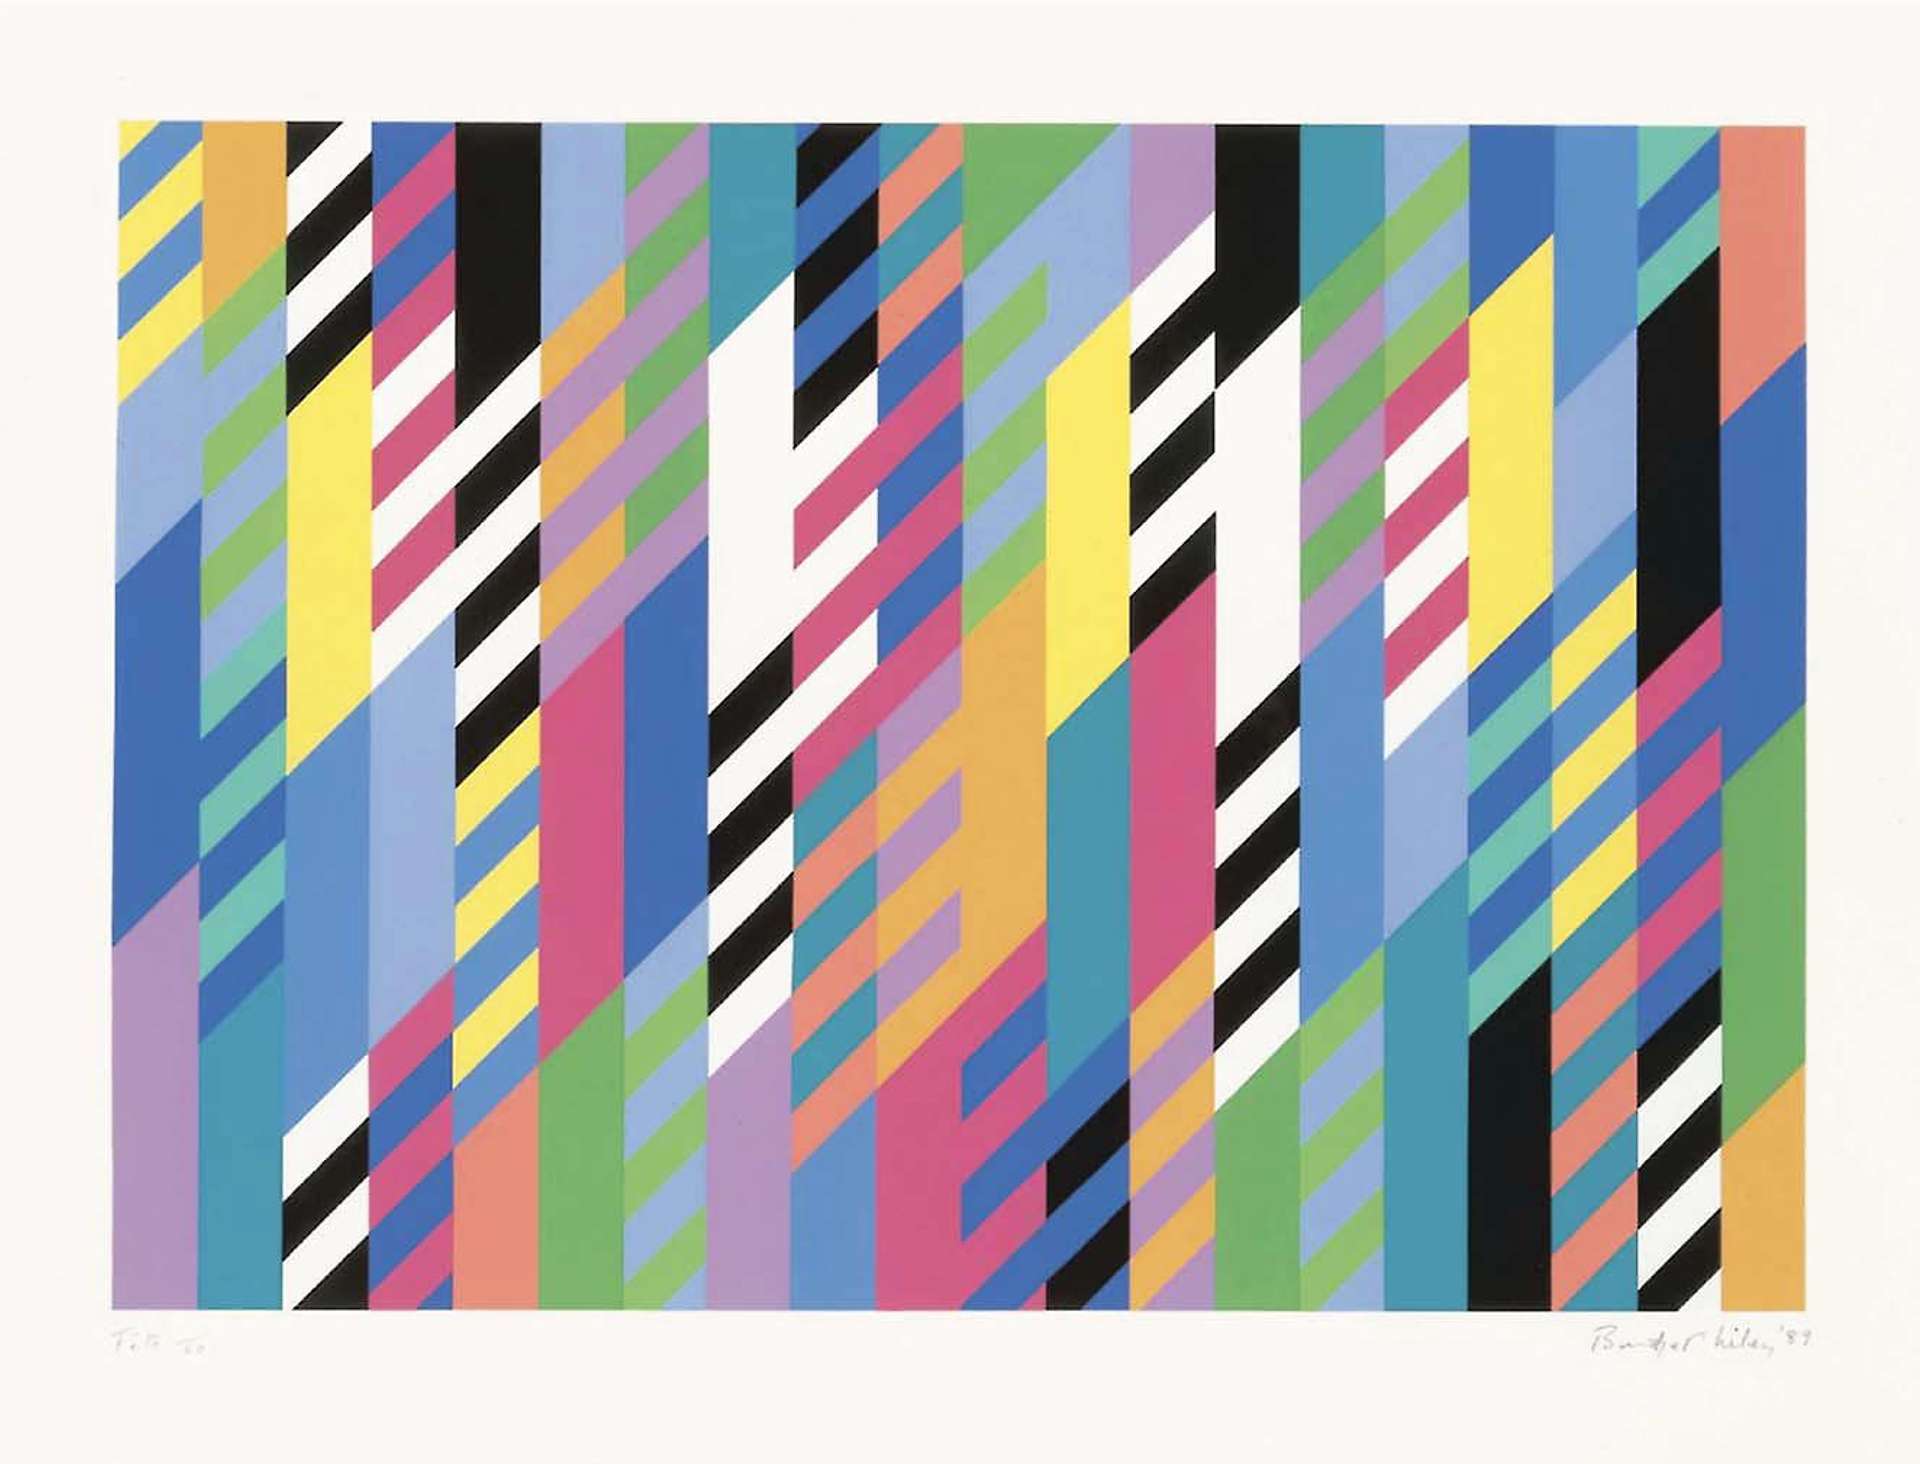 Optical illusion of horizontal lines with colour blocked patterns and staggered shapes